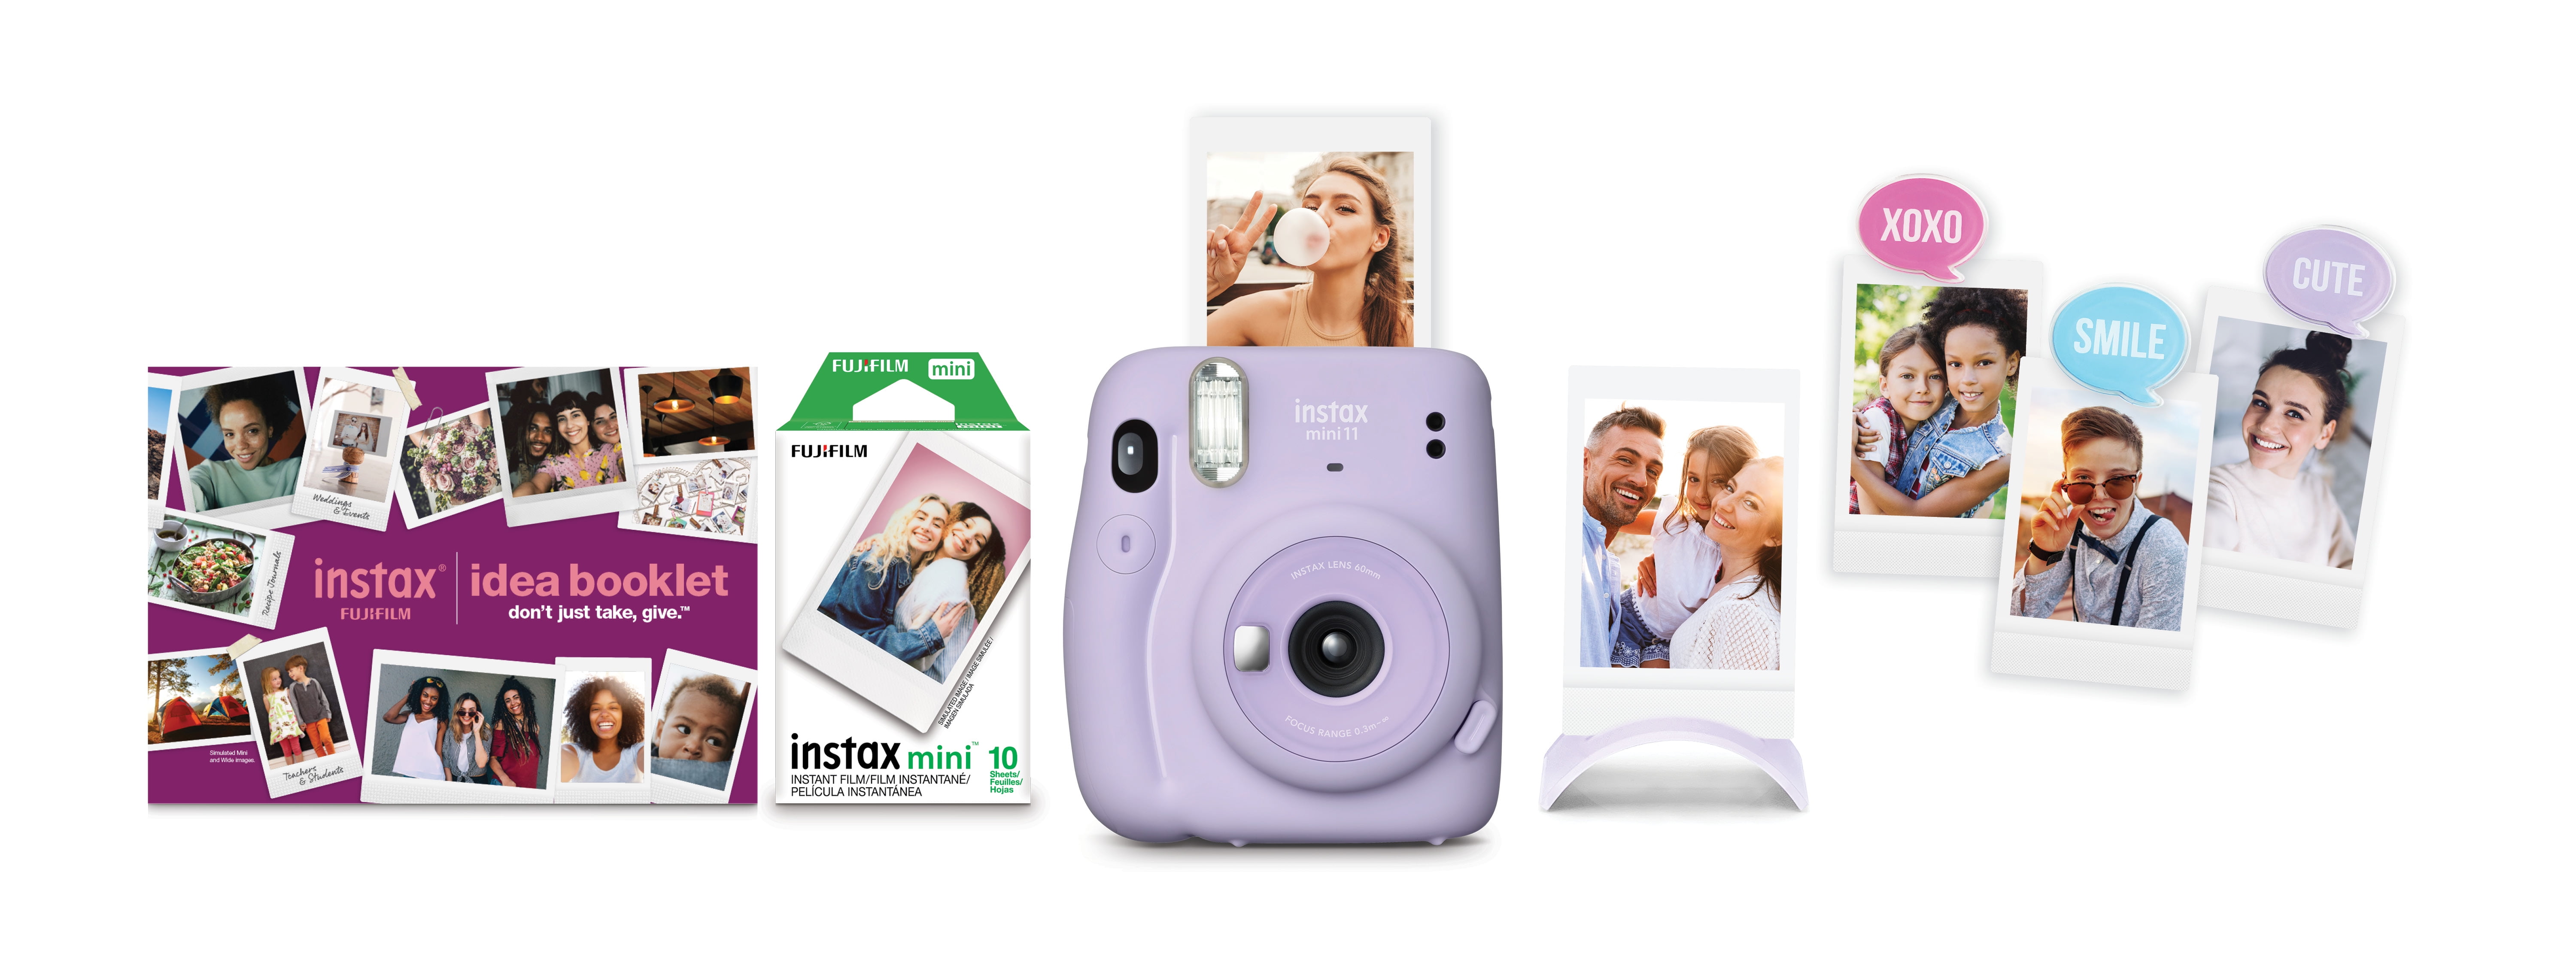 Perfect Gift for Her- Buy Instax Mini 11 Cameras Online